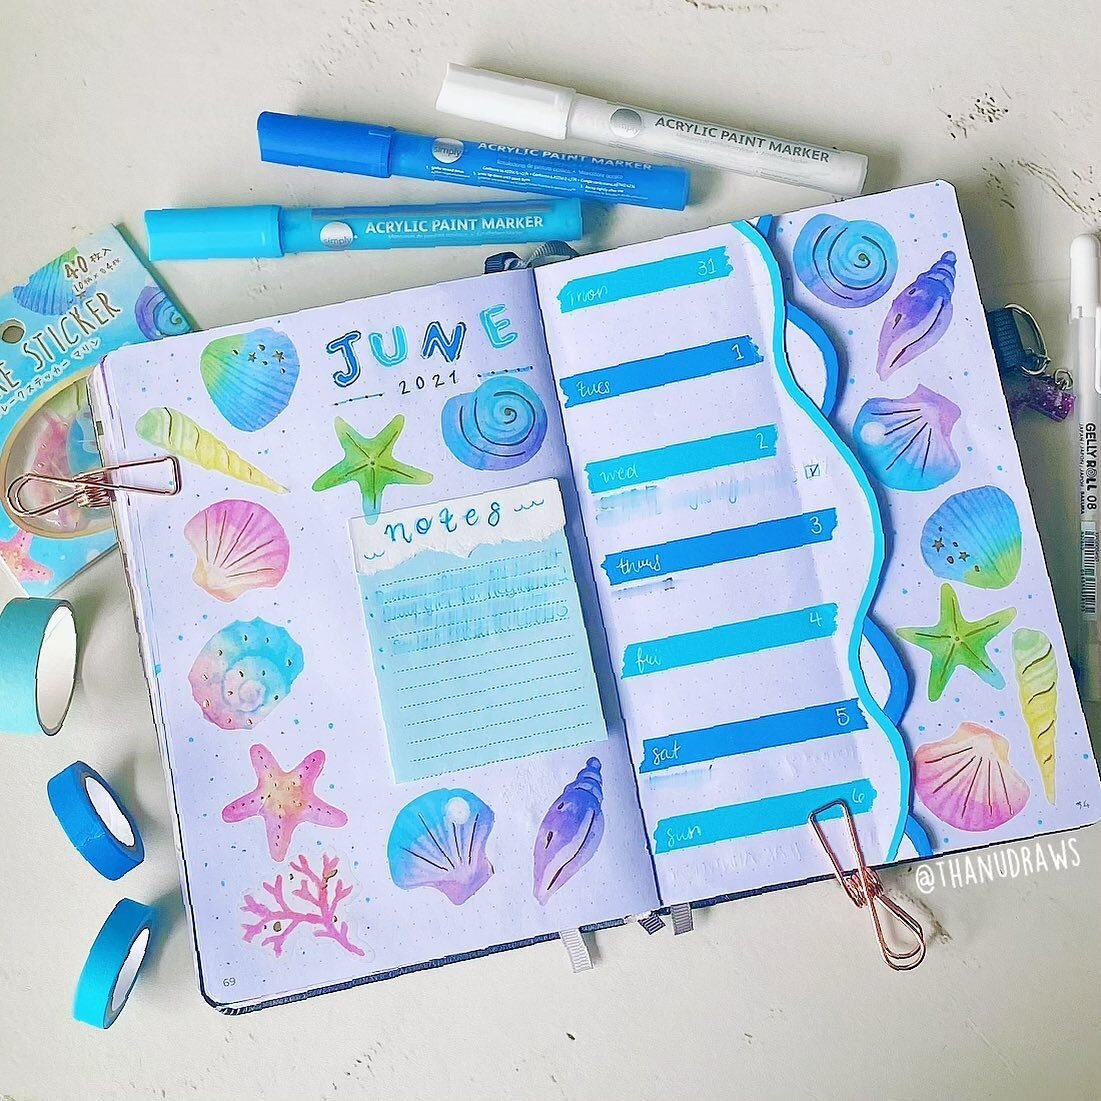 weekly spread idea for June! I have been using the Dutch door method a lot this year, and I love incorporating the theme into the door style! 🌊🌊🌊